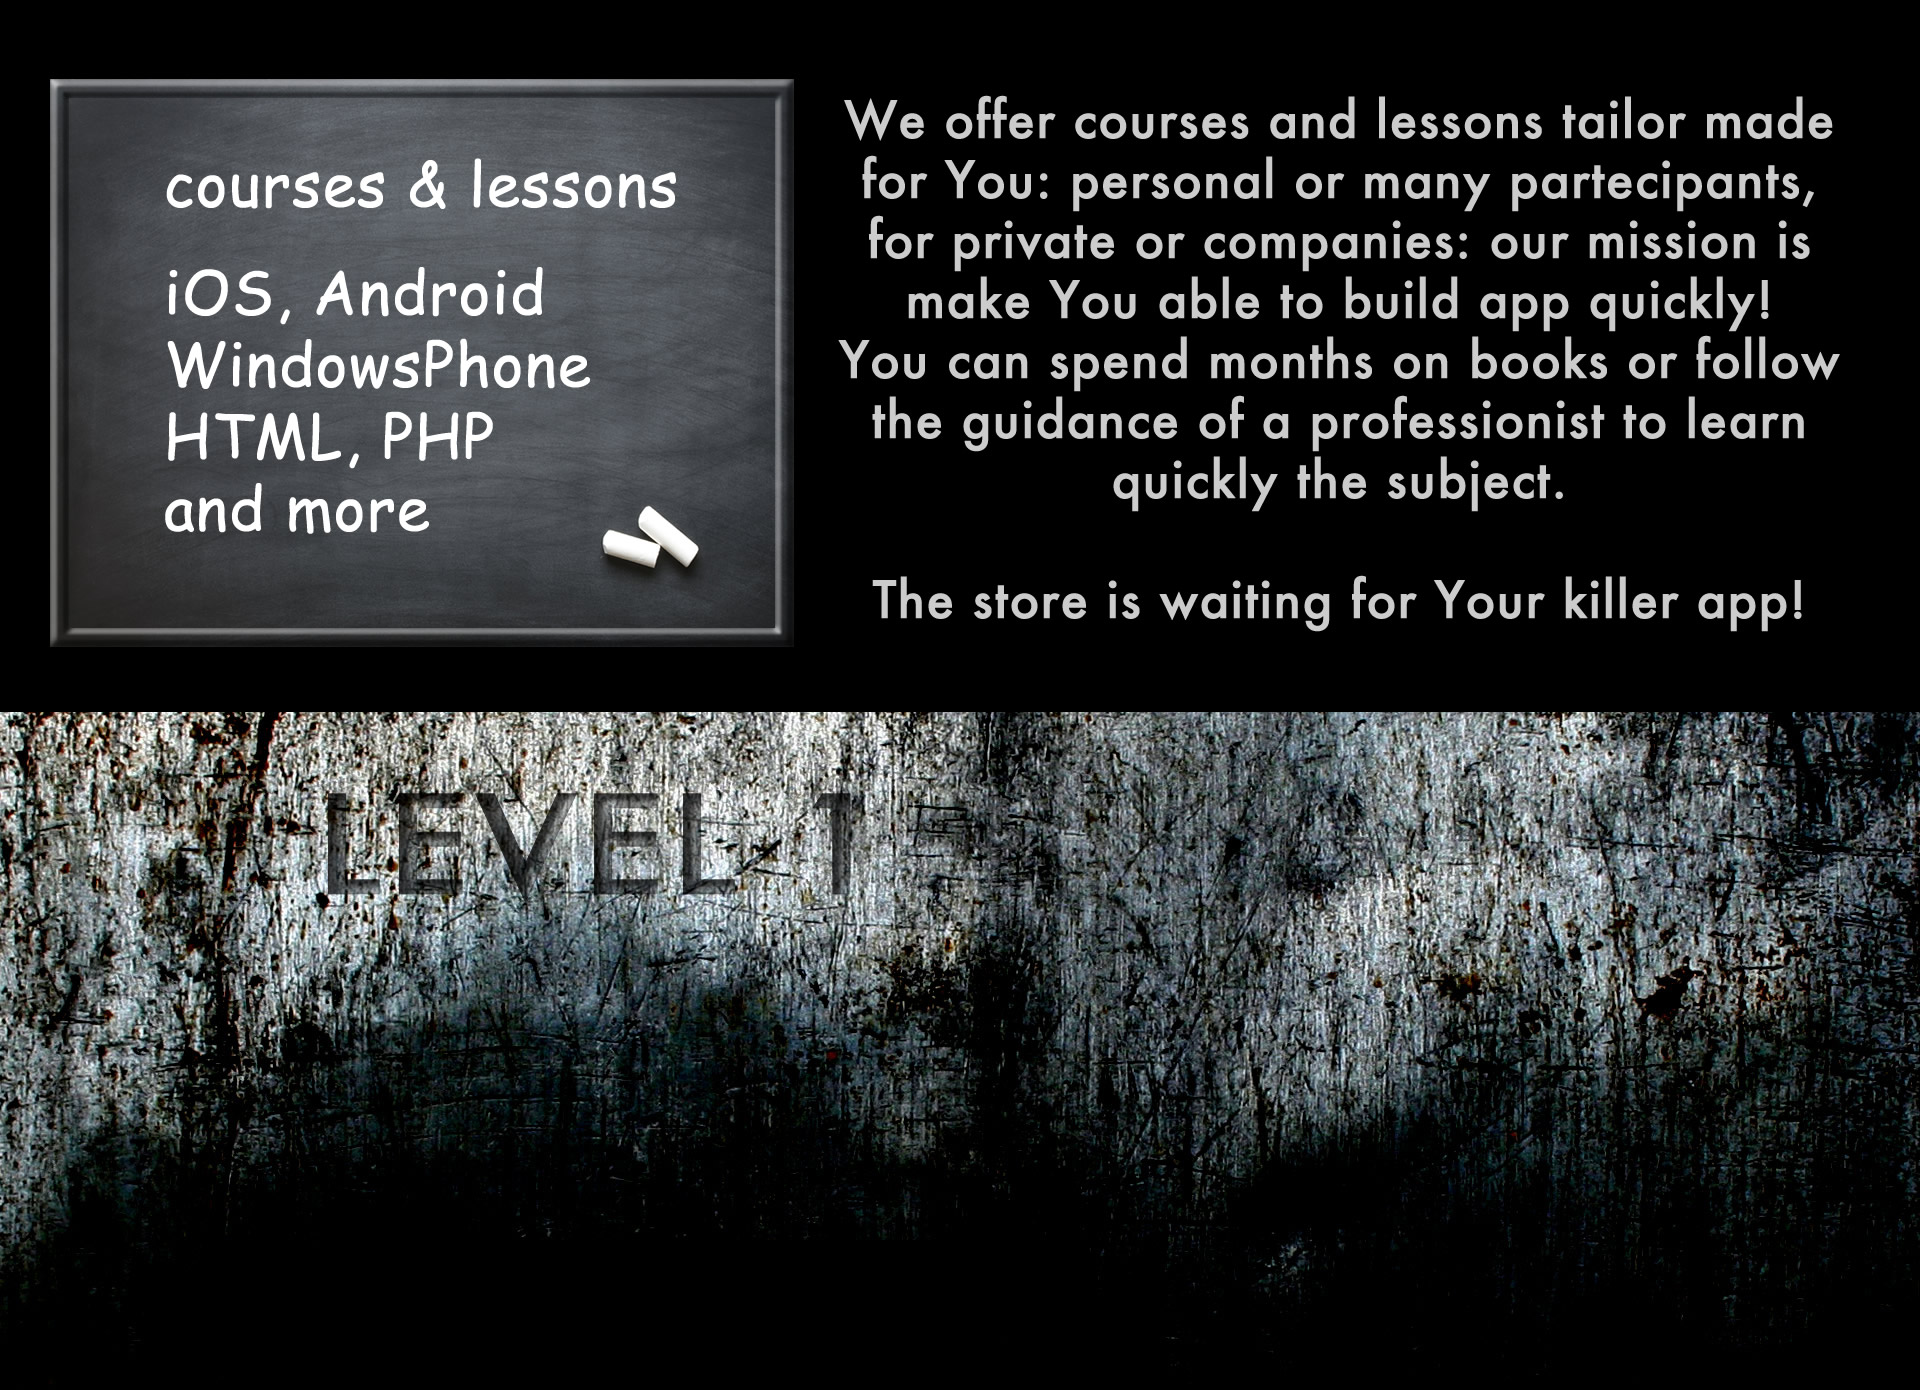 We offer courses and lessons tailor made for You: personal or many partecipants, for private or companies: our mission is make You able to build app quickly! You can spend months on books or follow the guidance of a professionist to learn quickly the subject. The store is waiting for Your killer app!